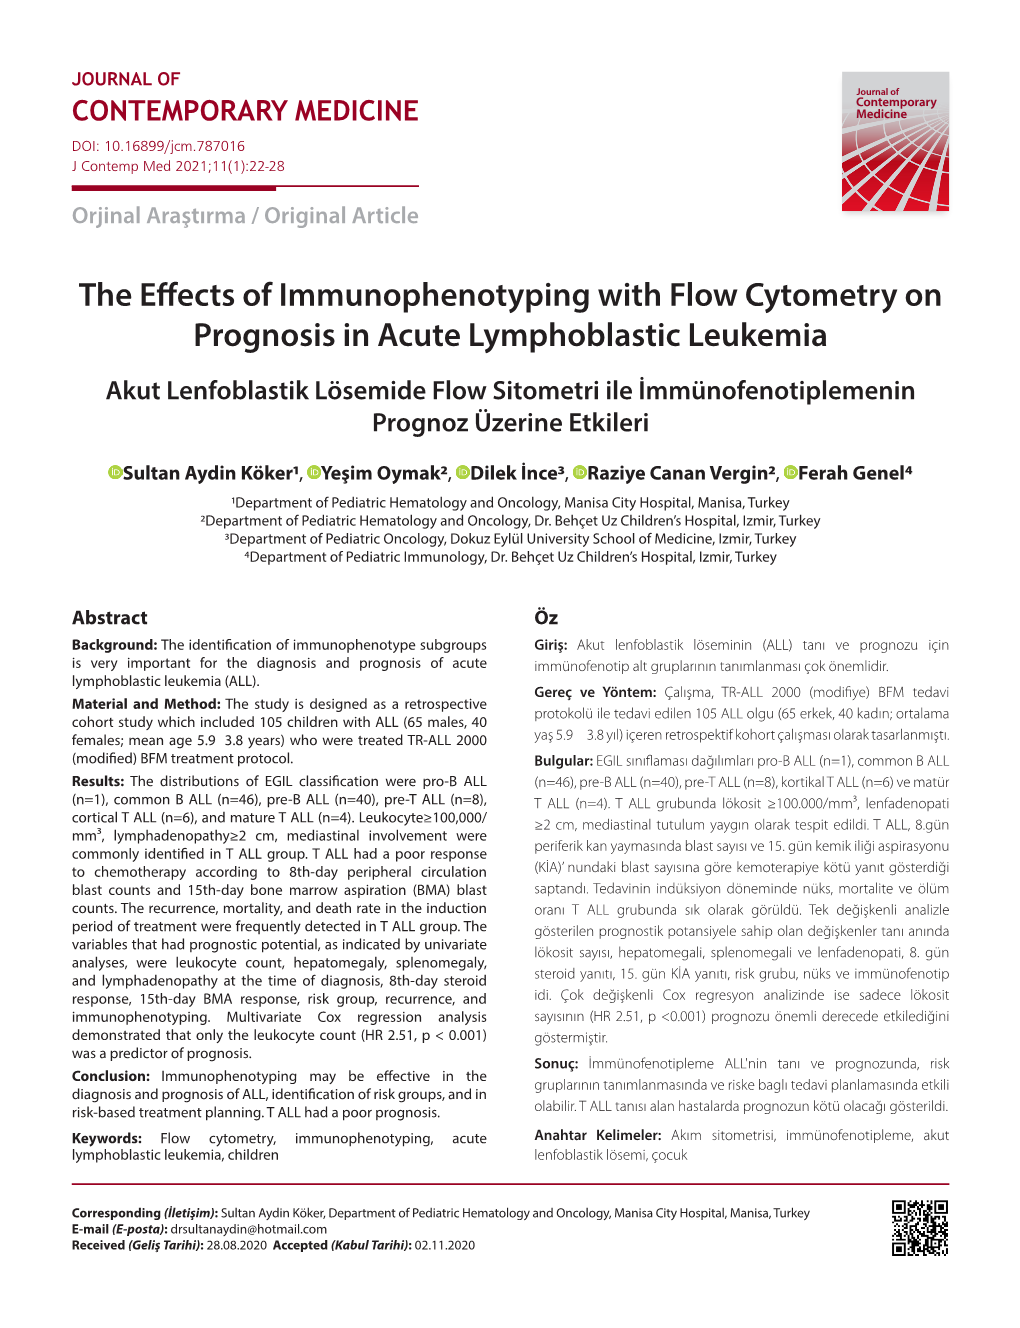 The Effects of Immunophenotyping with Flow Cytometry on Prognosis in Acute Lymphoblastic Leukemia